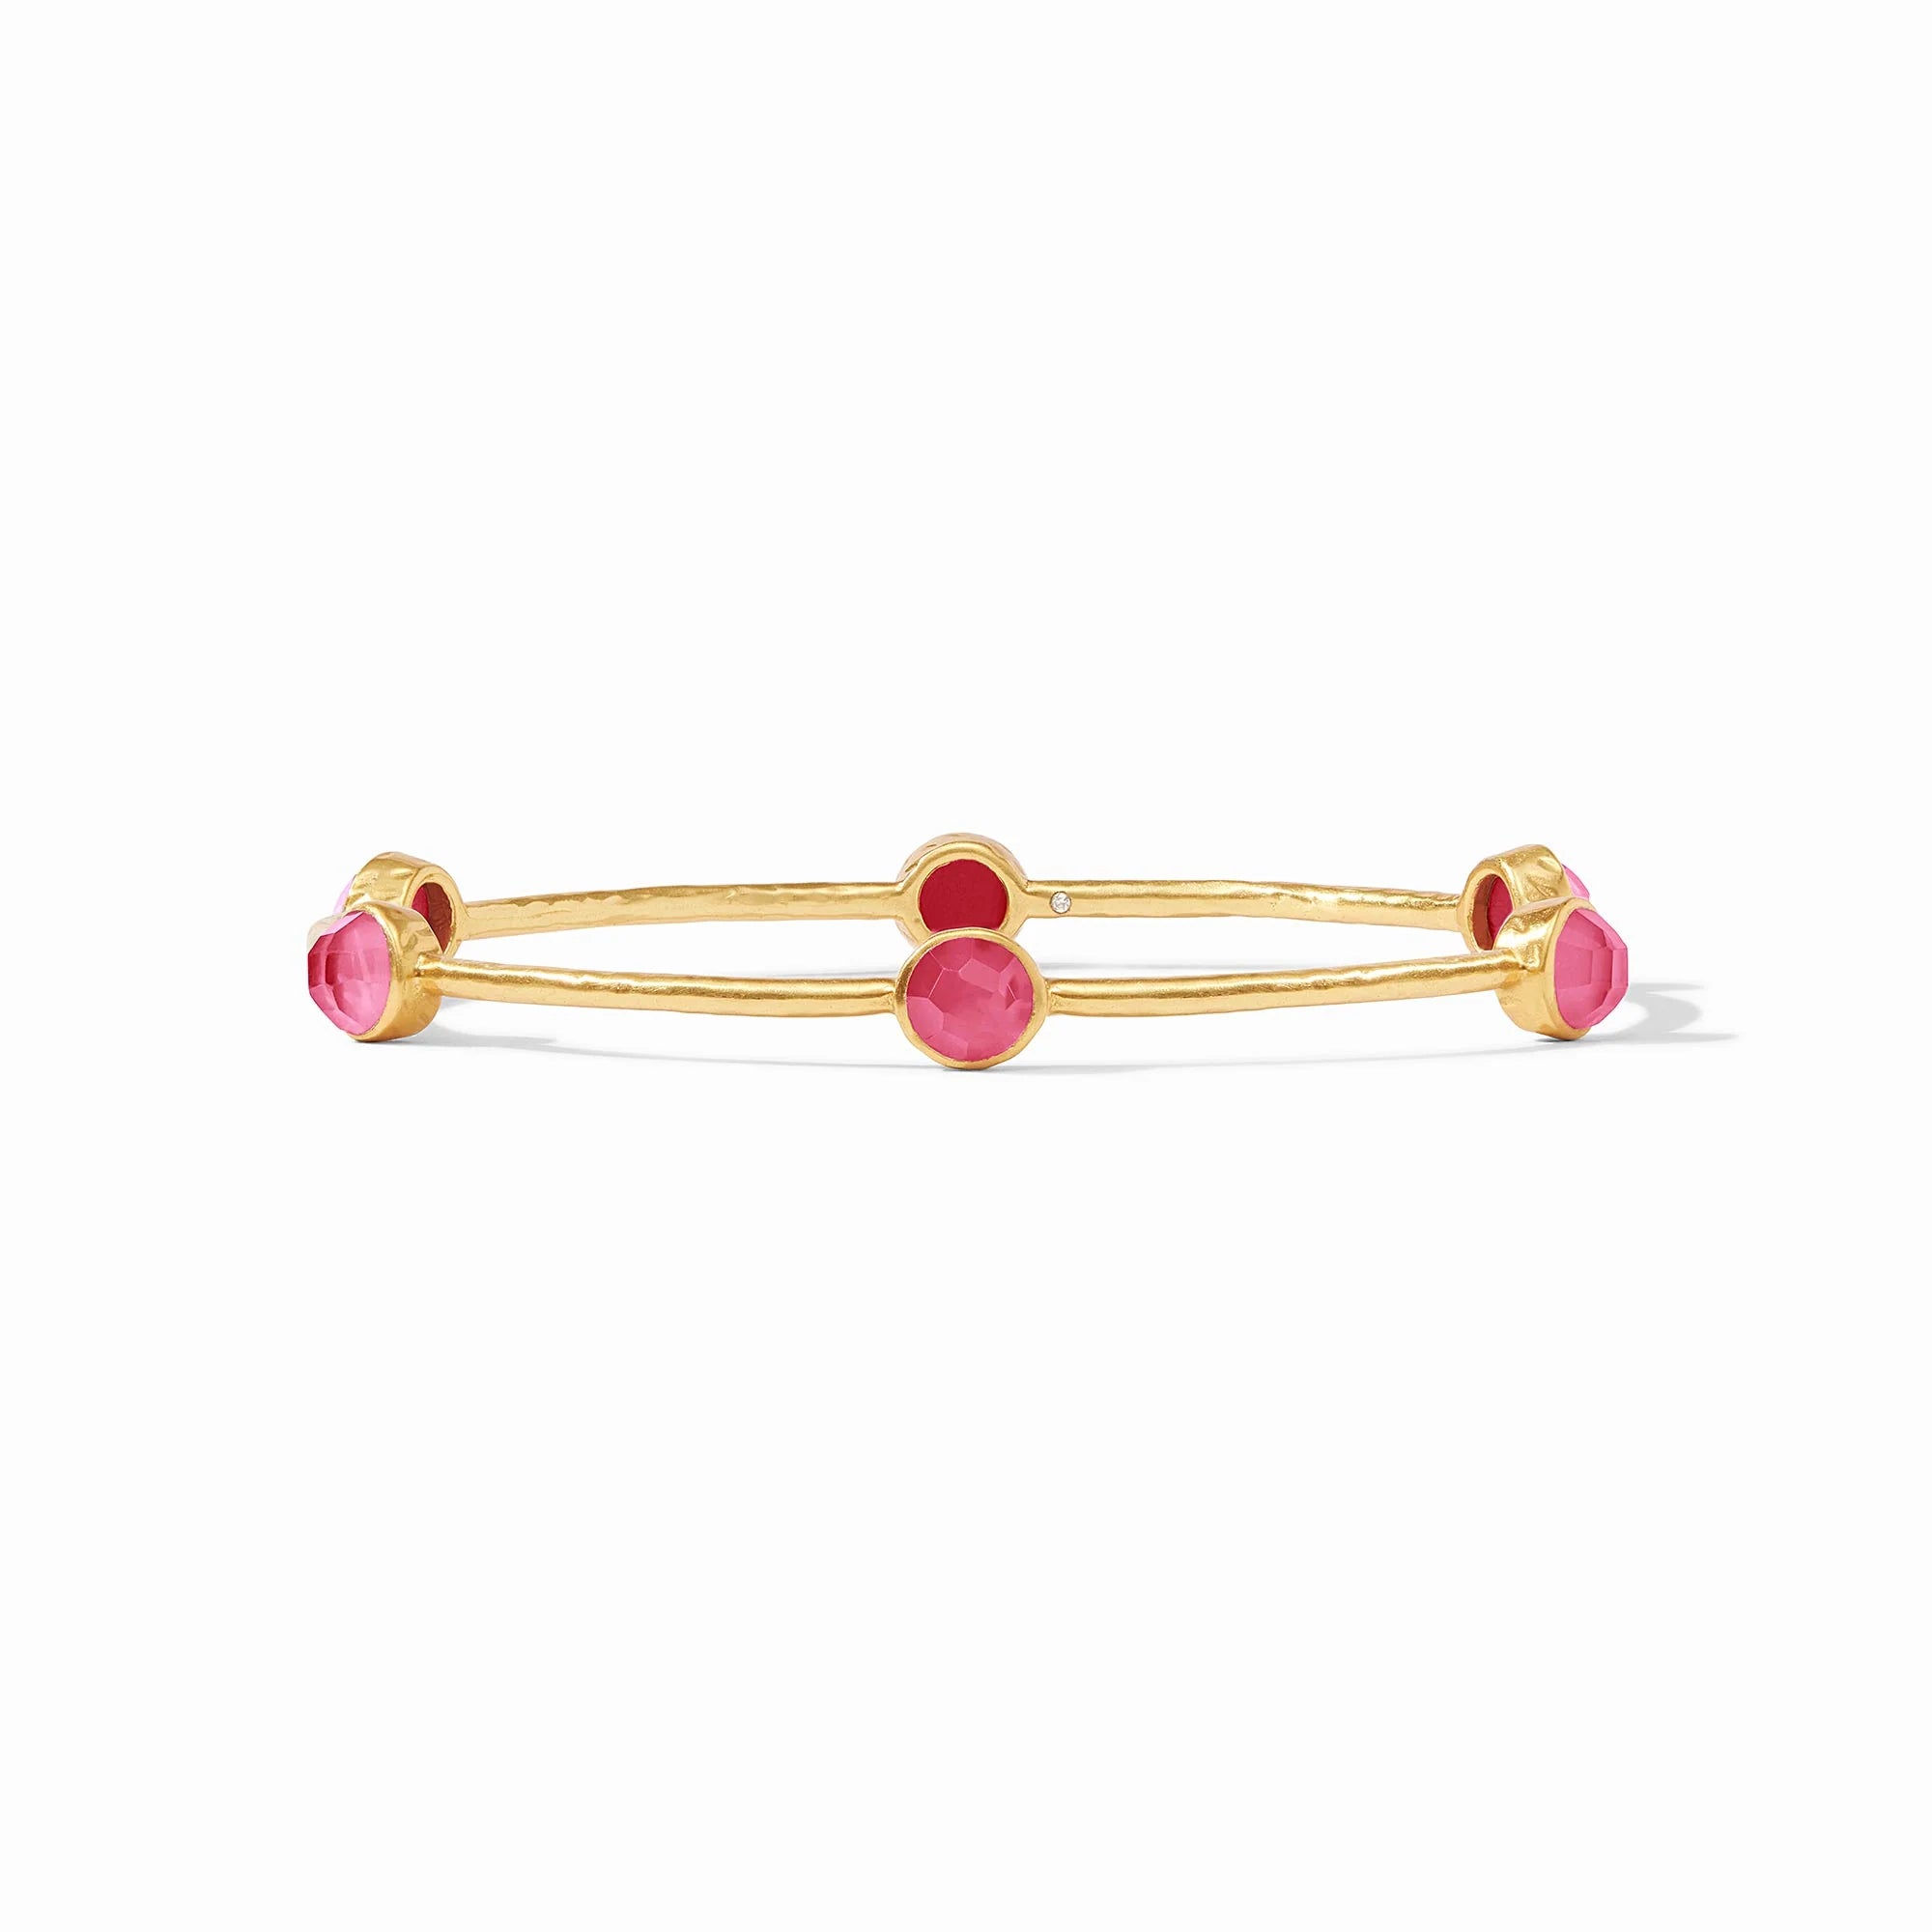 Julie Vos Milano Luxe Bangle in Iridescent Raspberry